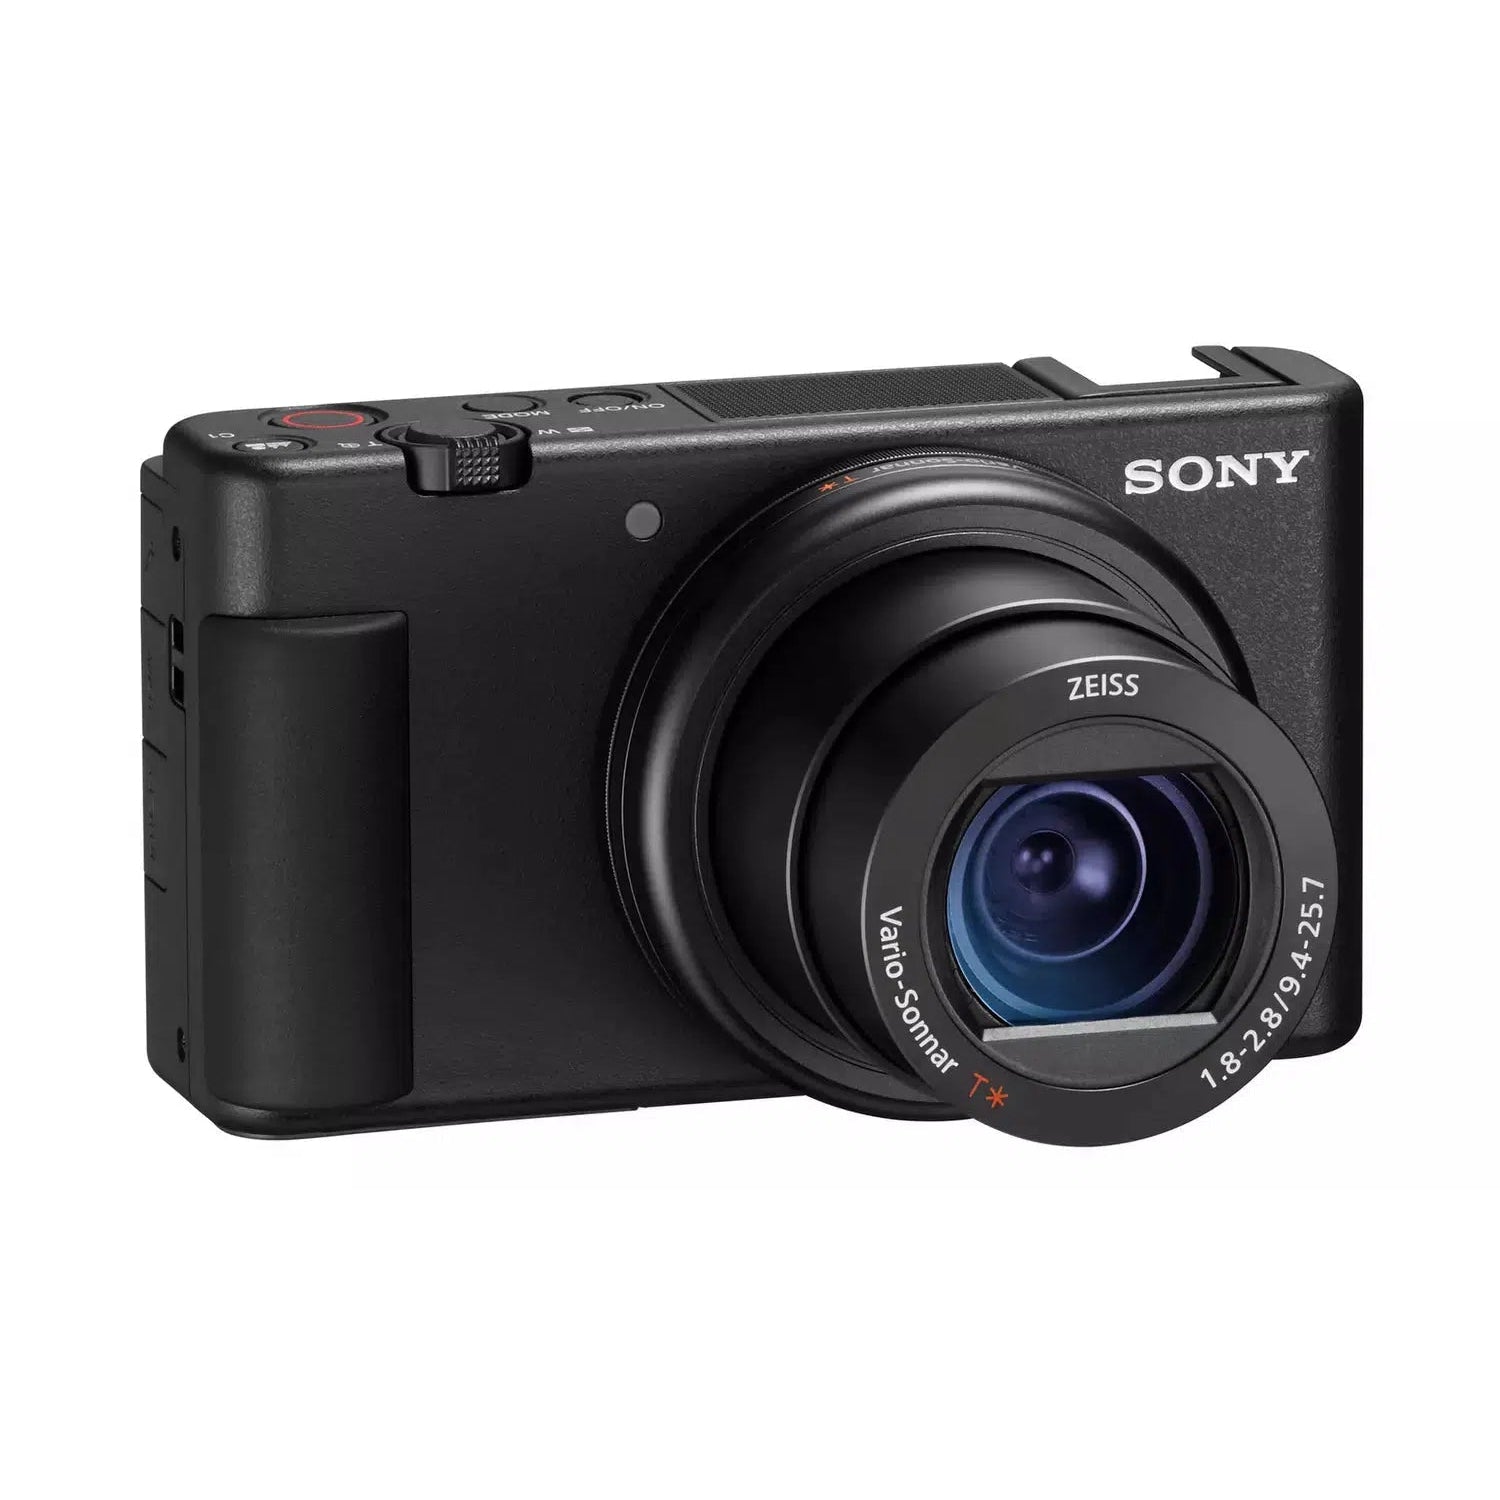 Sony ZV-1 Compact Vlogging Camera with 24-70mm Lens - Black - Excellent - With Charger